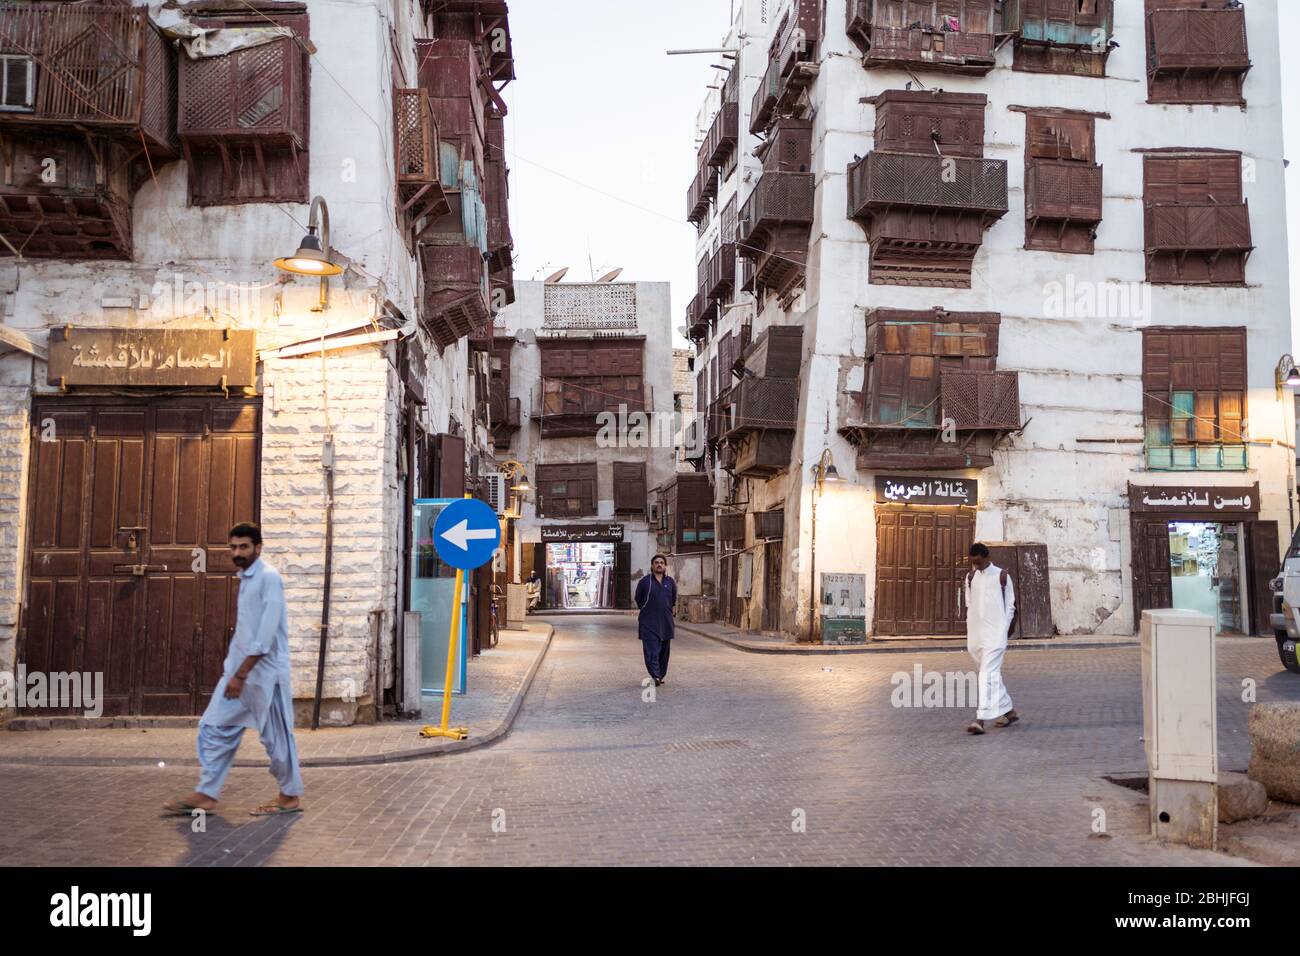 Jeddah / Saudi Arabia - January 16, 2020: Night view of street of old town historic Al-Balad with people walking and wooden balconies in buildings Stock Photo